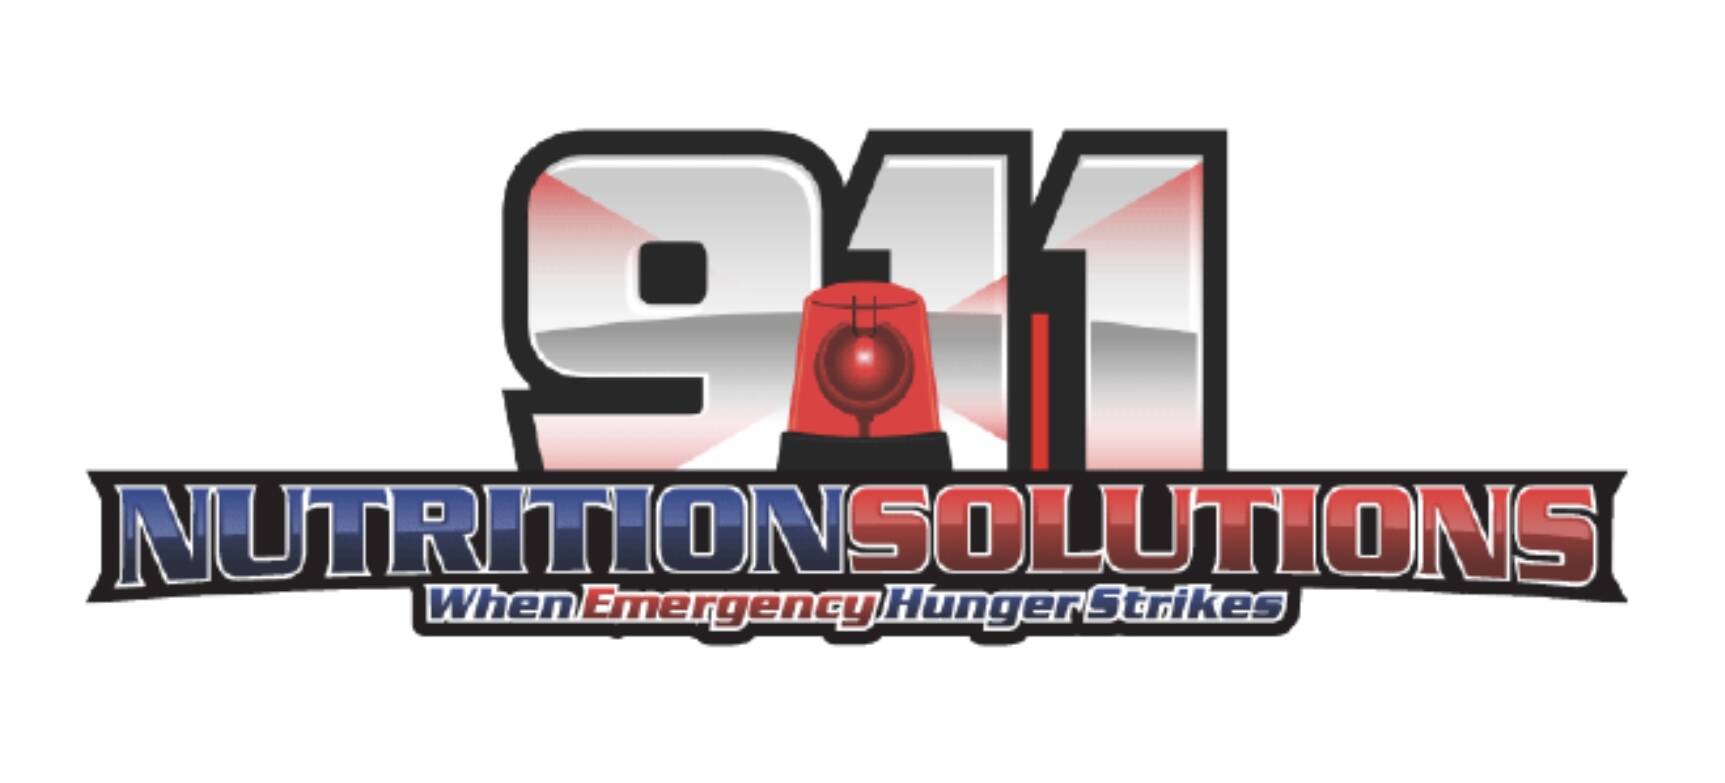 911 Nutrition Solutions